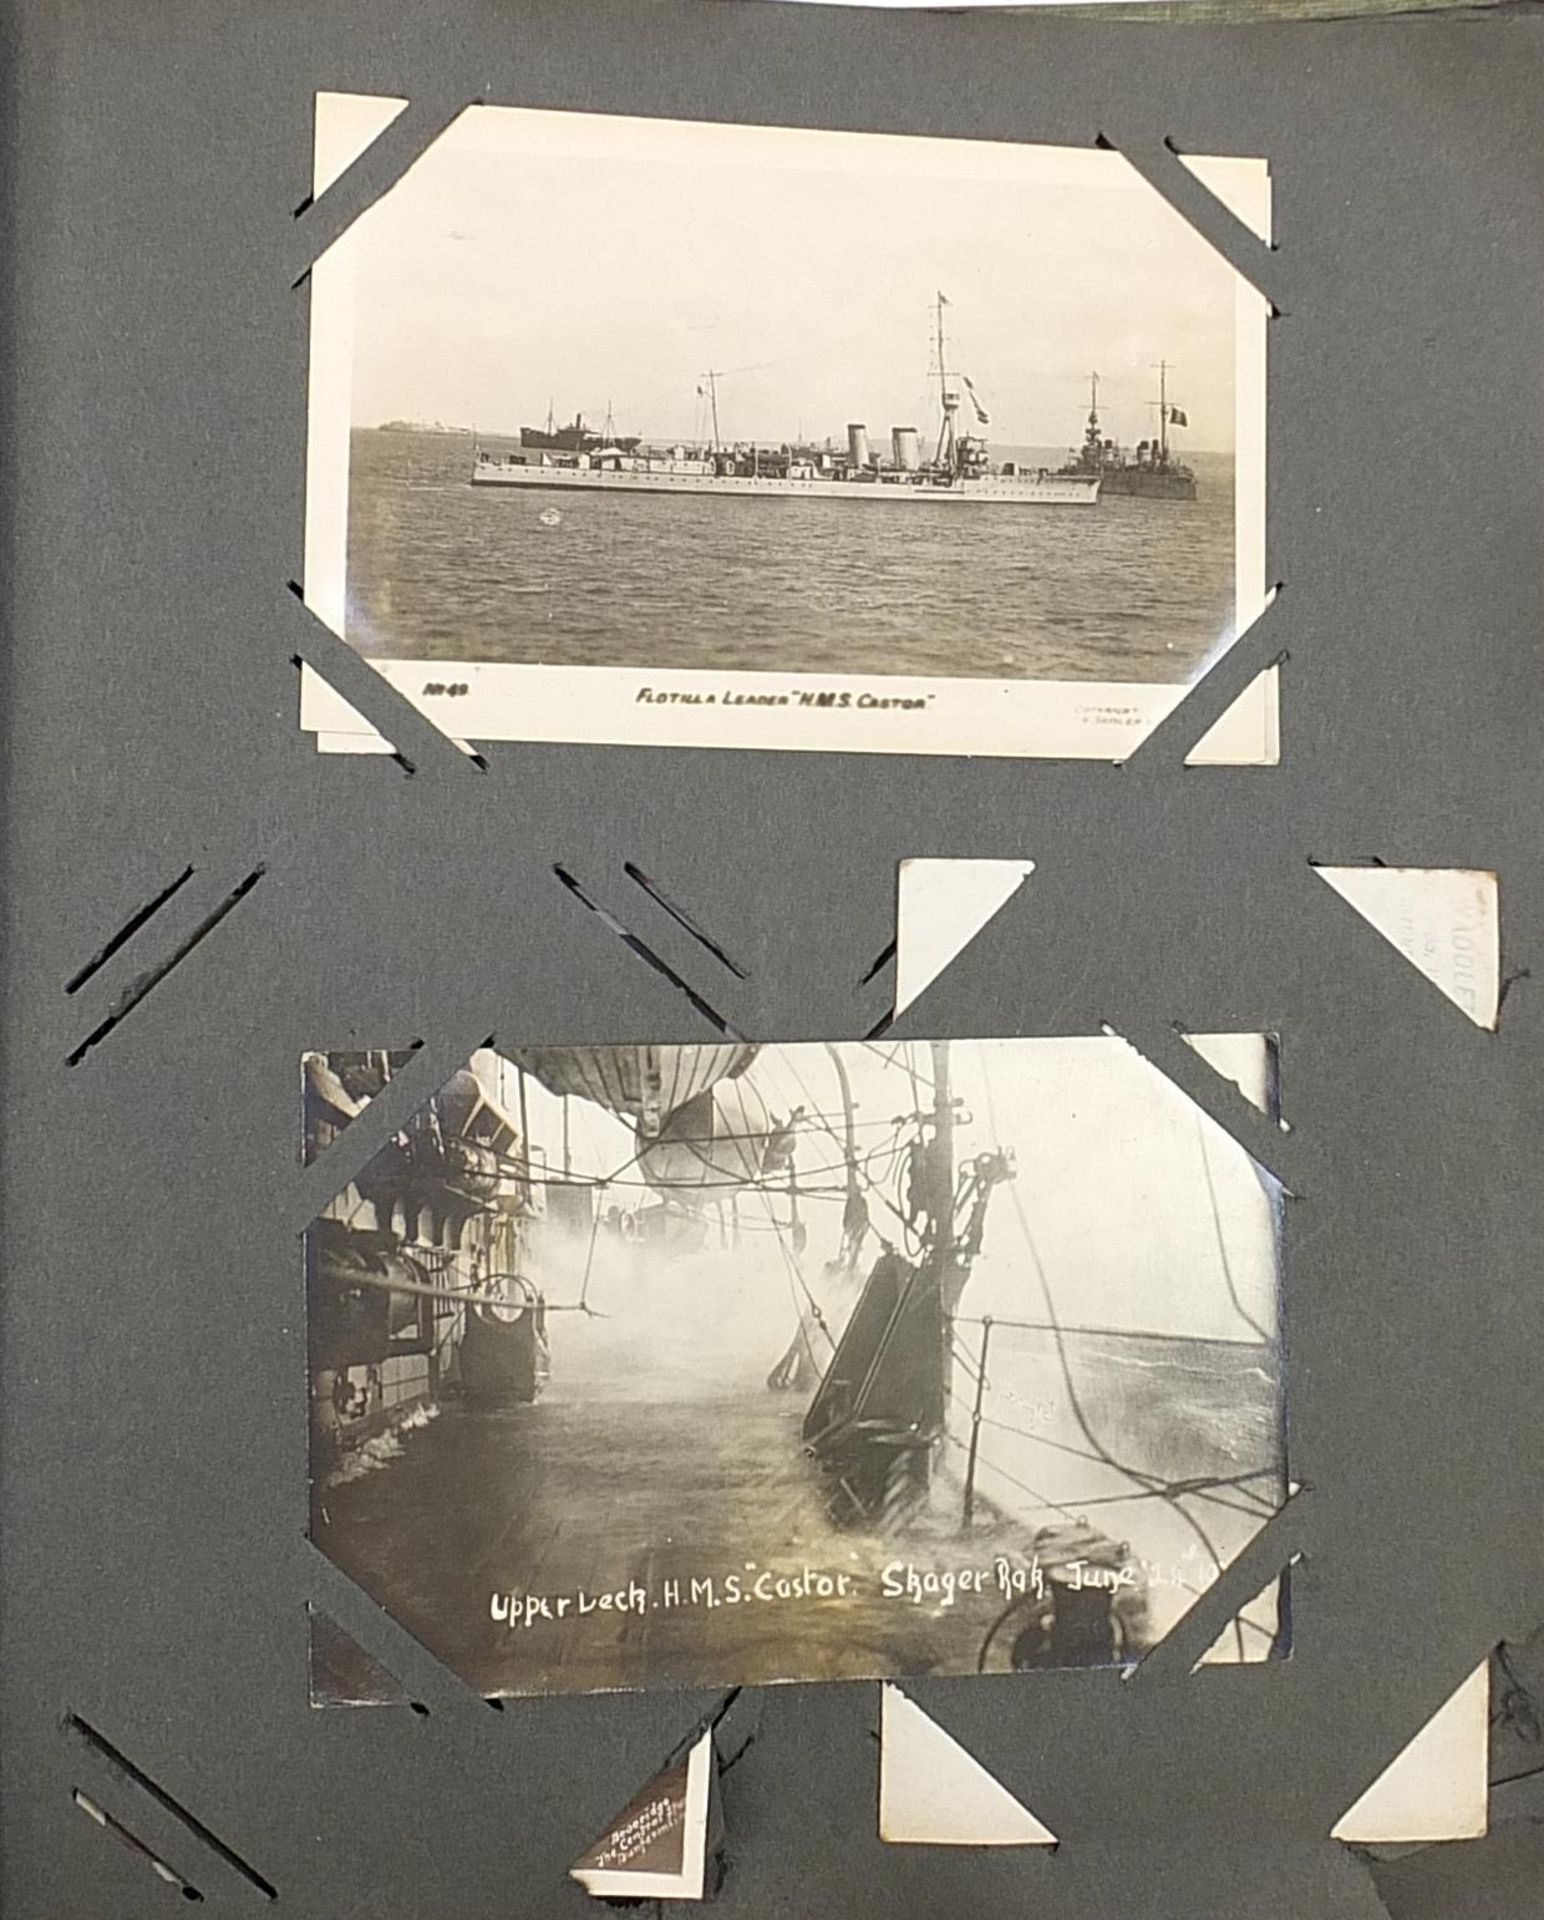 Topographical and Naval interest postcards arranged in an album, some photographic including ships - Image 14 of 15